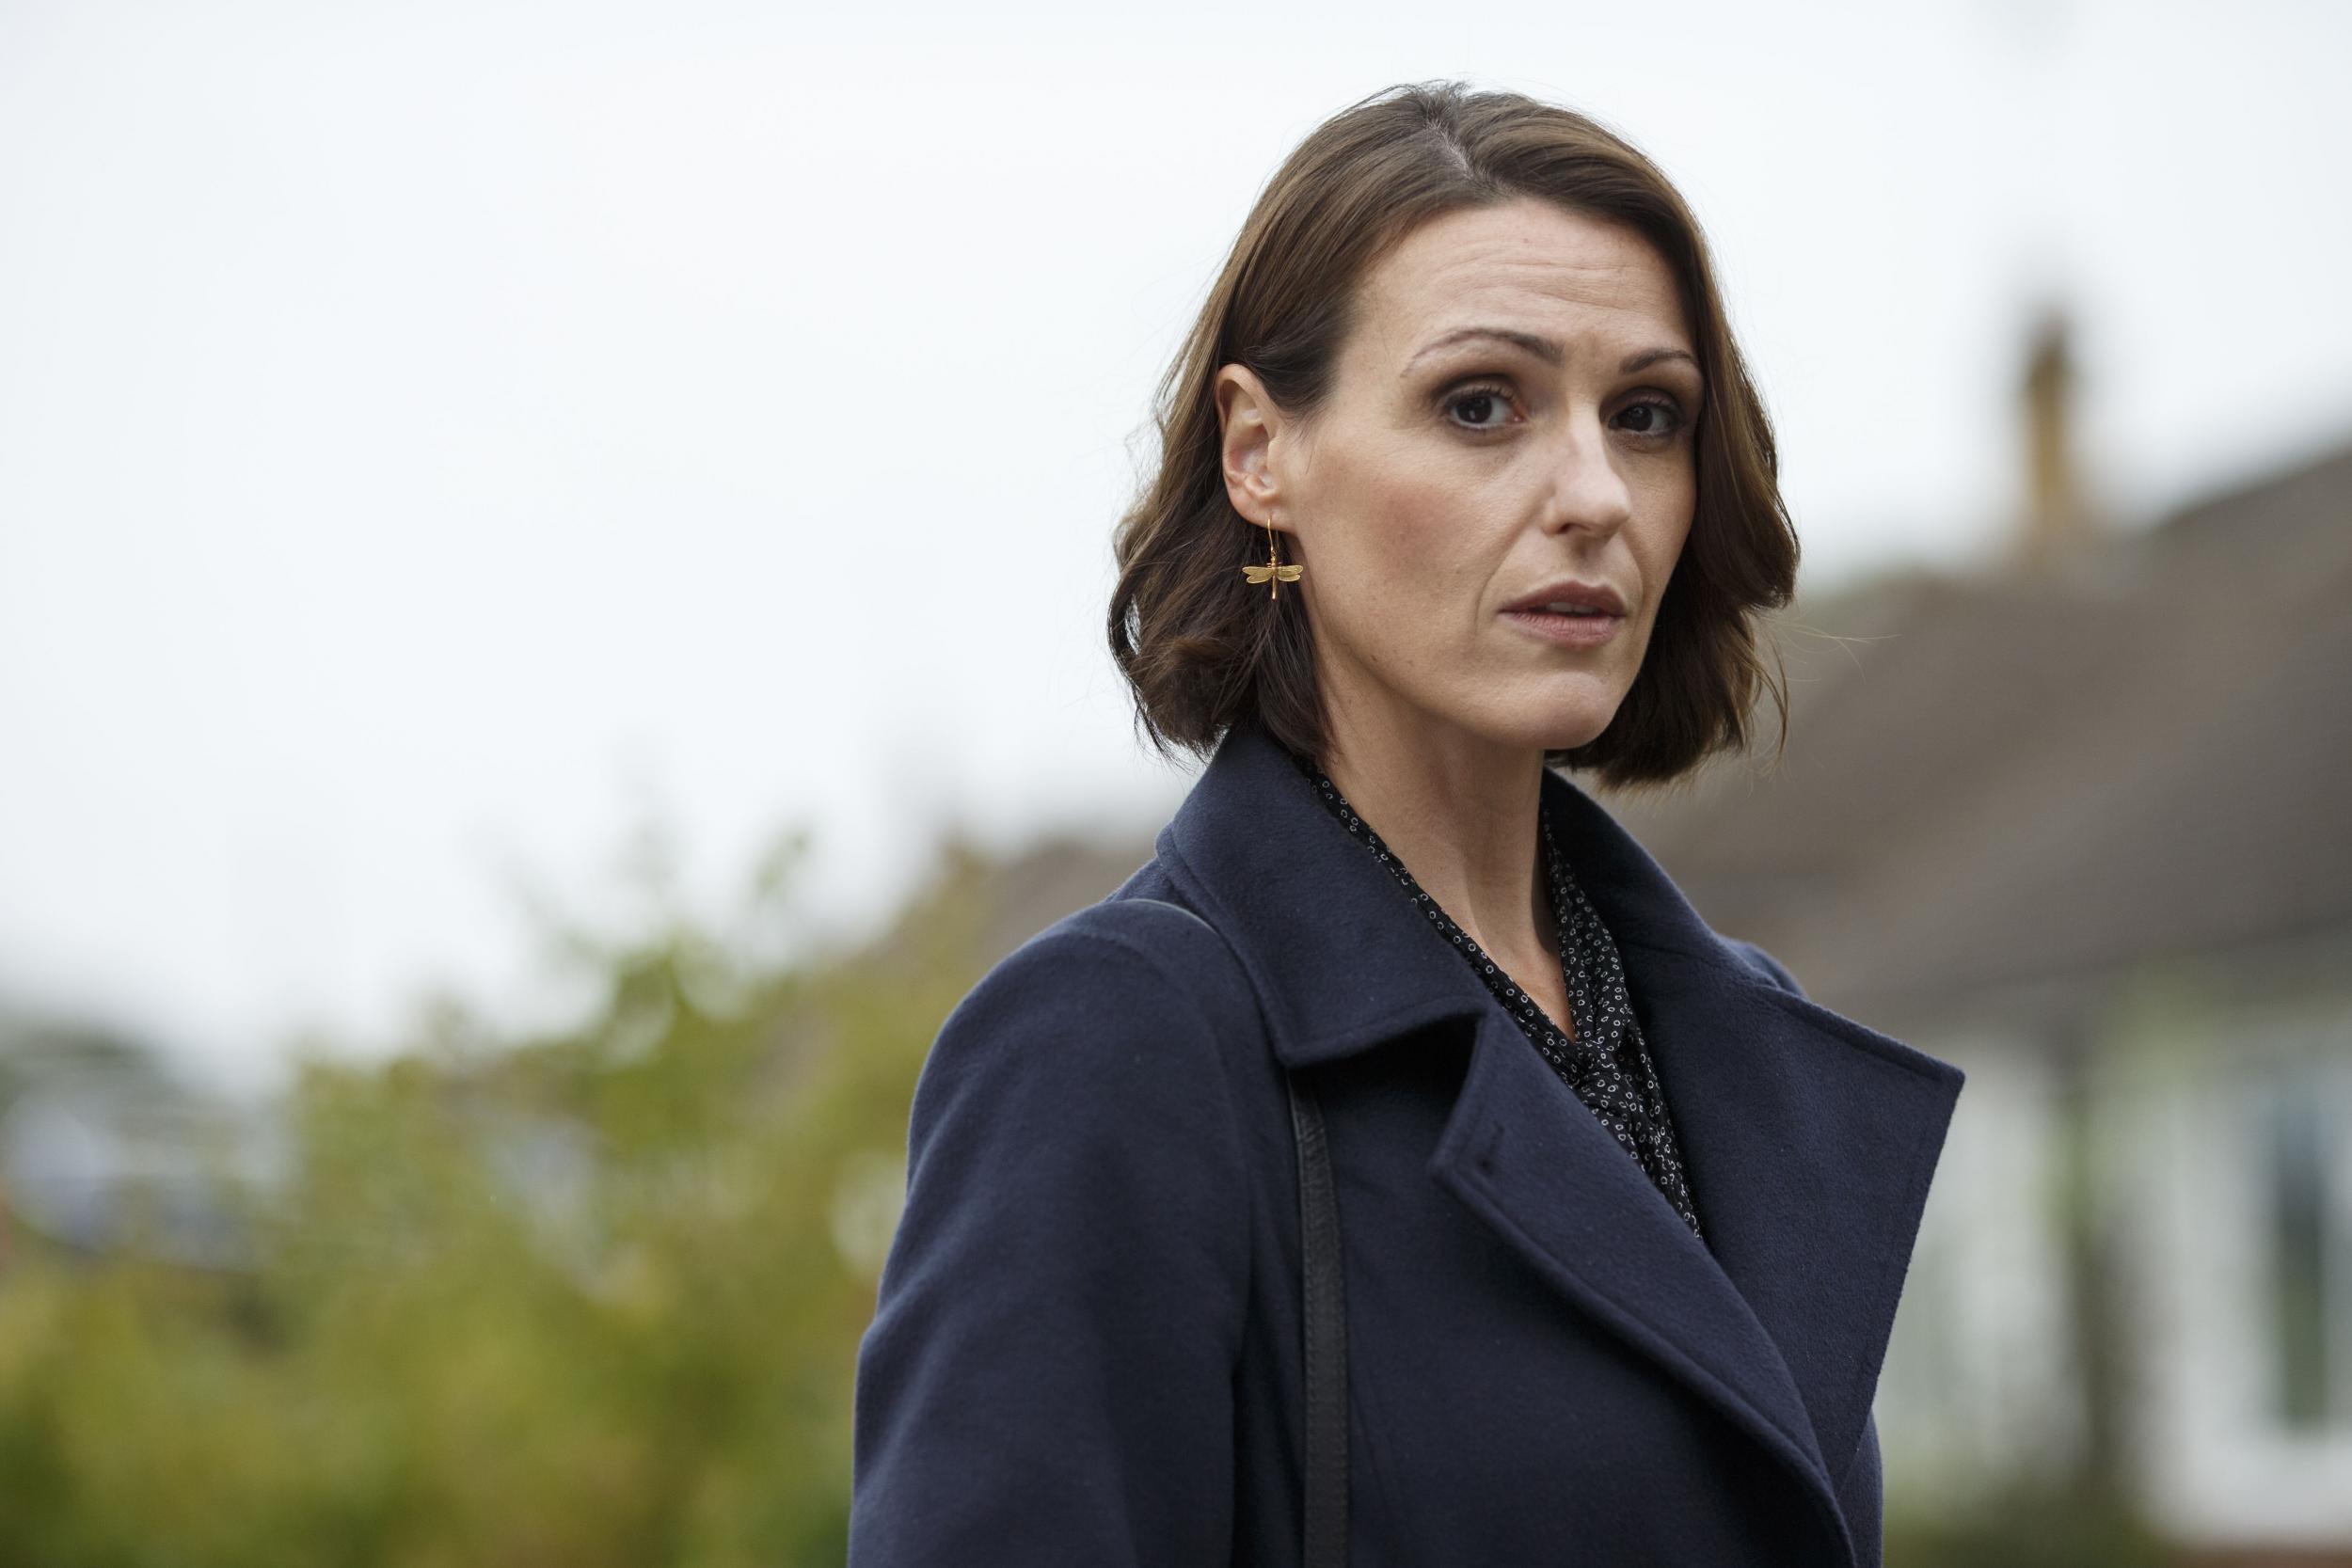 Suranne Jones leads the cast in this turbulent relationship drama